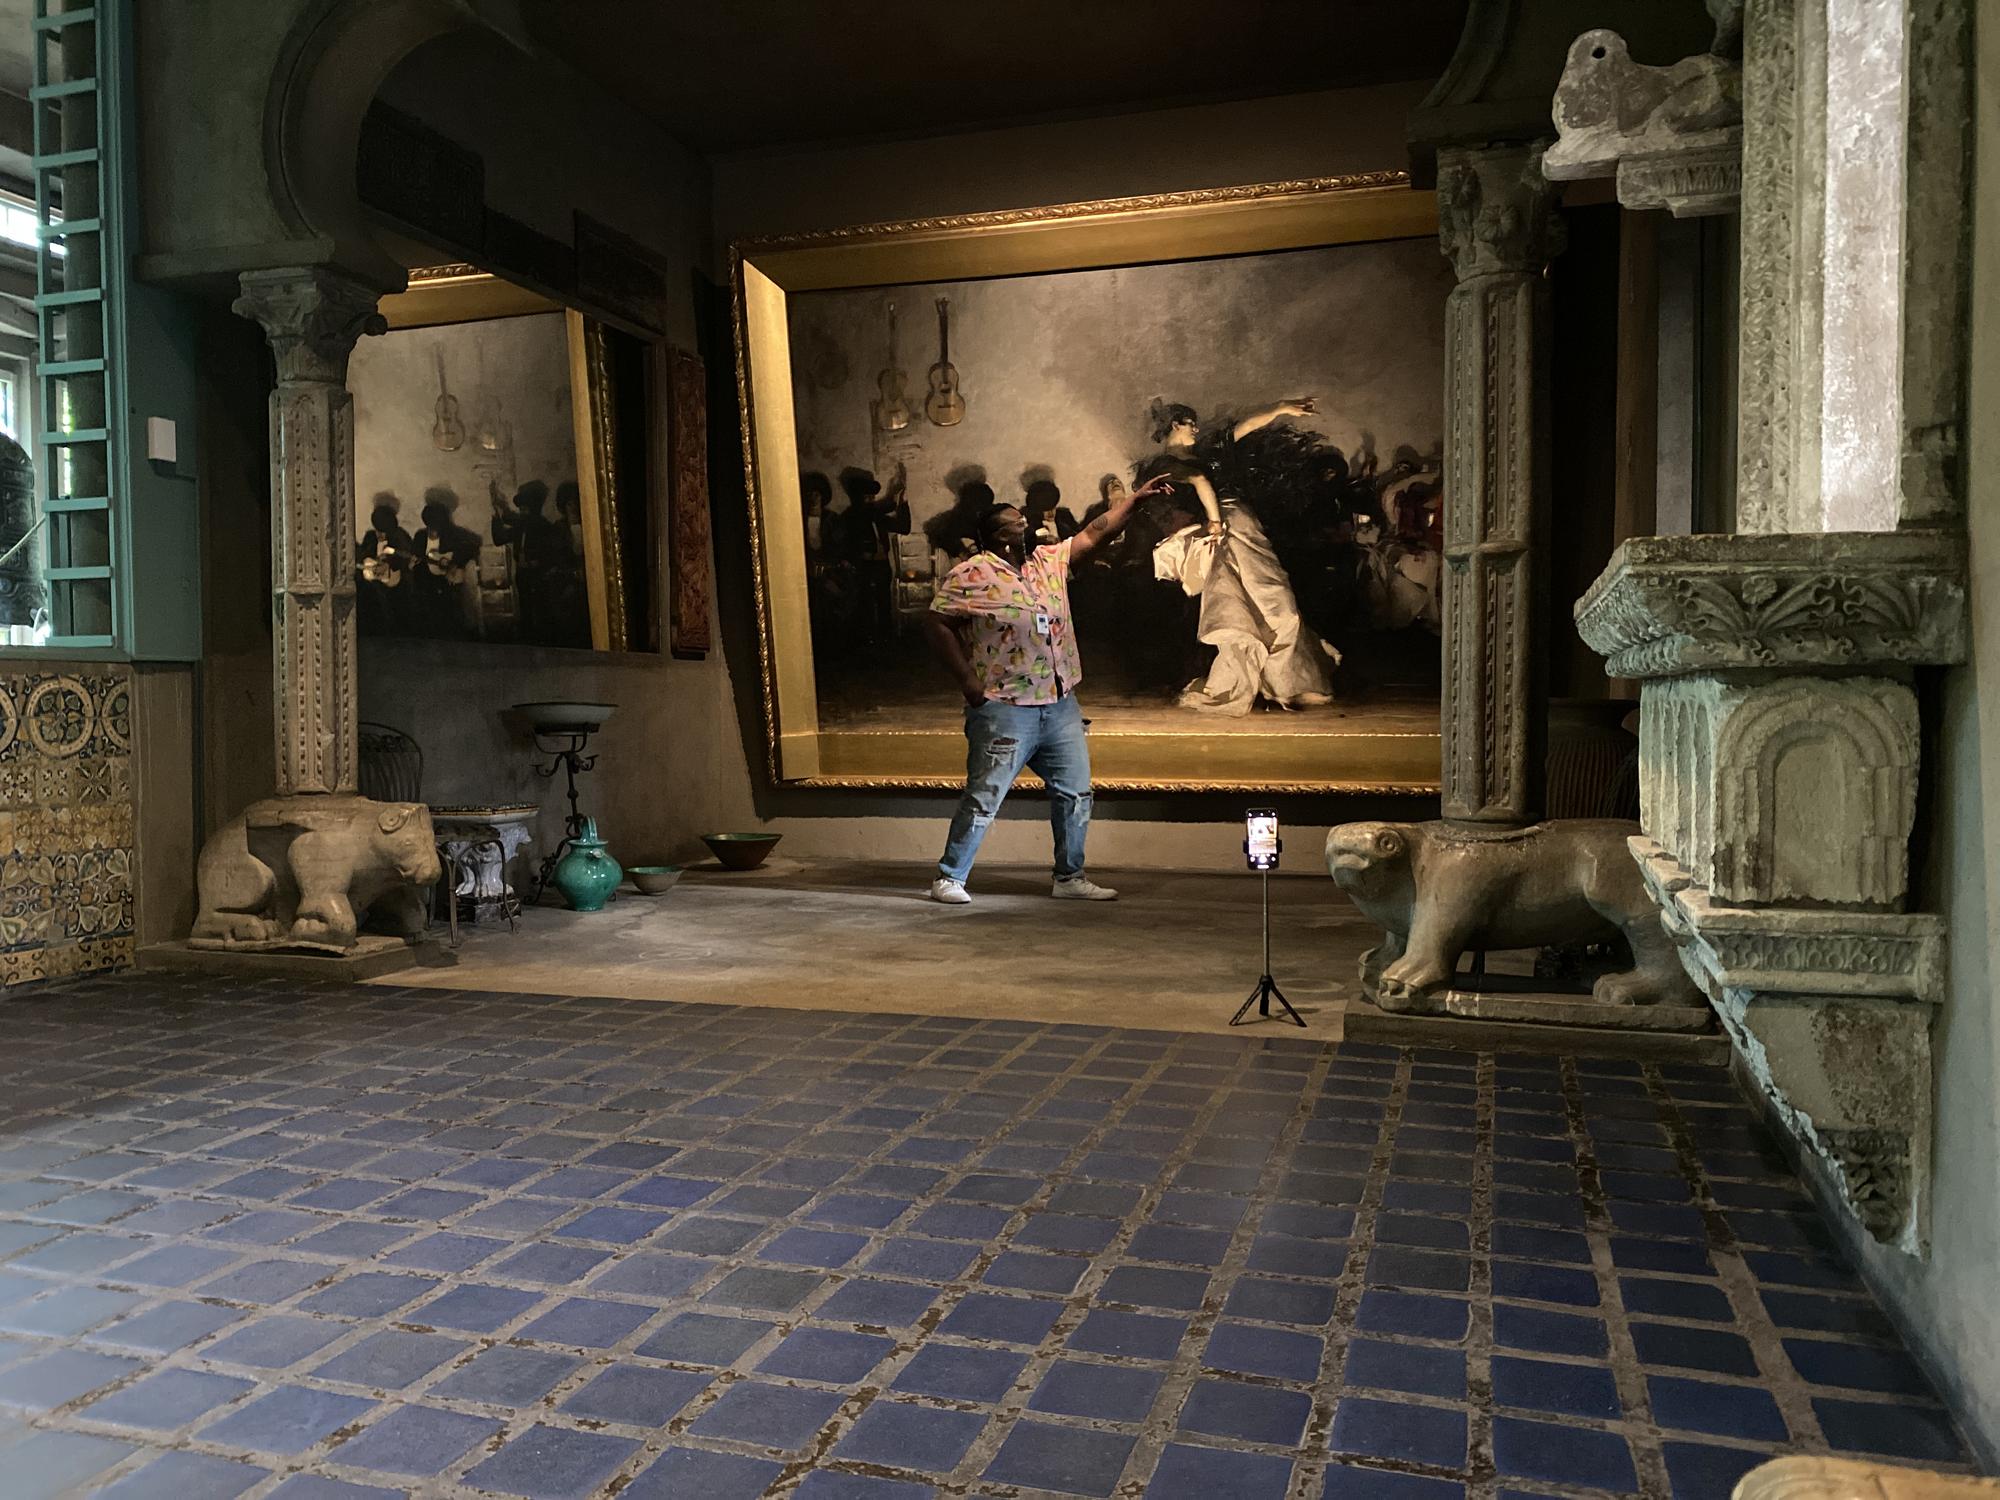 Porsha Olayiwola takes a selfie in front of a painting in the Spanish Cloister at the Isabella Stuart Gardner Museum.